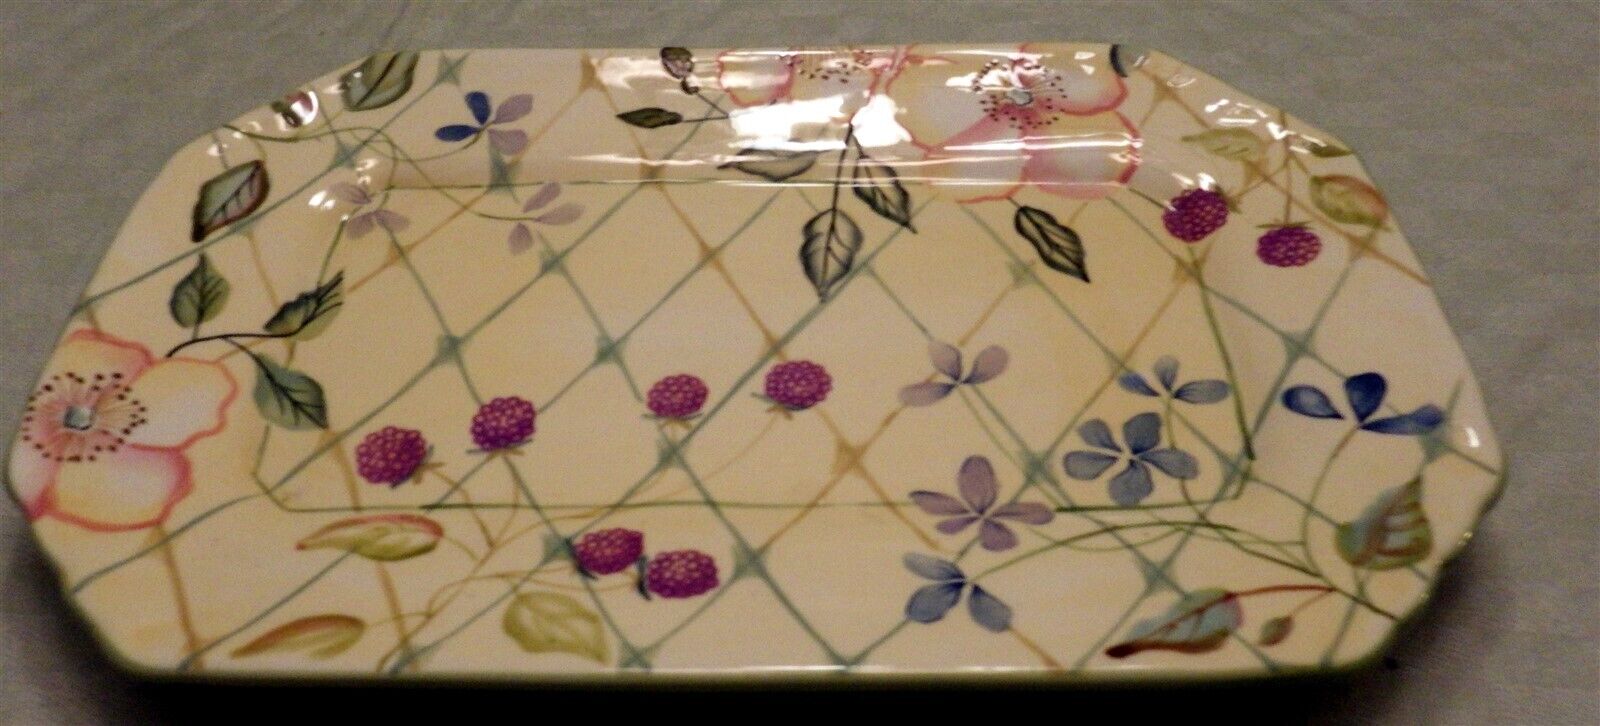 NEW Tracy Porter THE EVELYN COLLECTION Serving Platter Dogwood Berries 12x8 